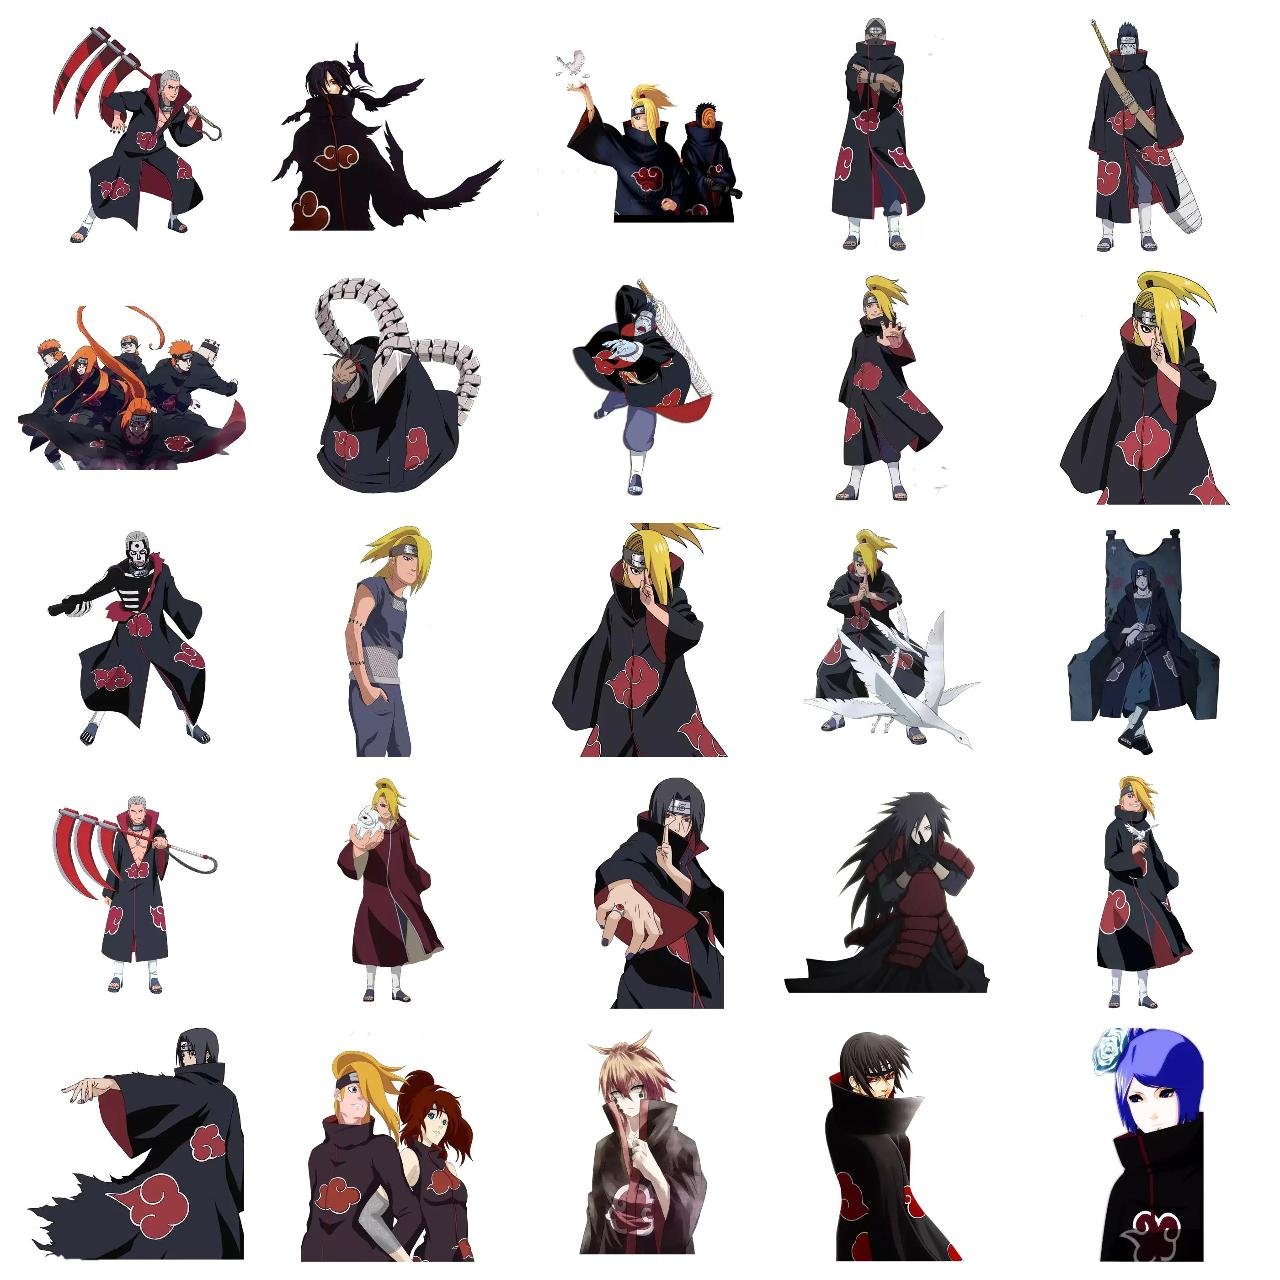 Naruto #7 Naruto sticker pack for Whatsapp, Telegram, Signal, and others chatting and message apps